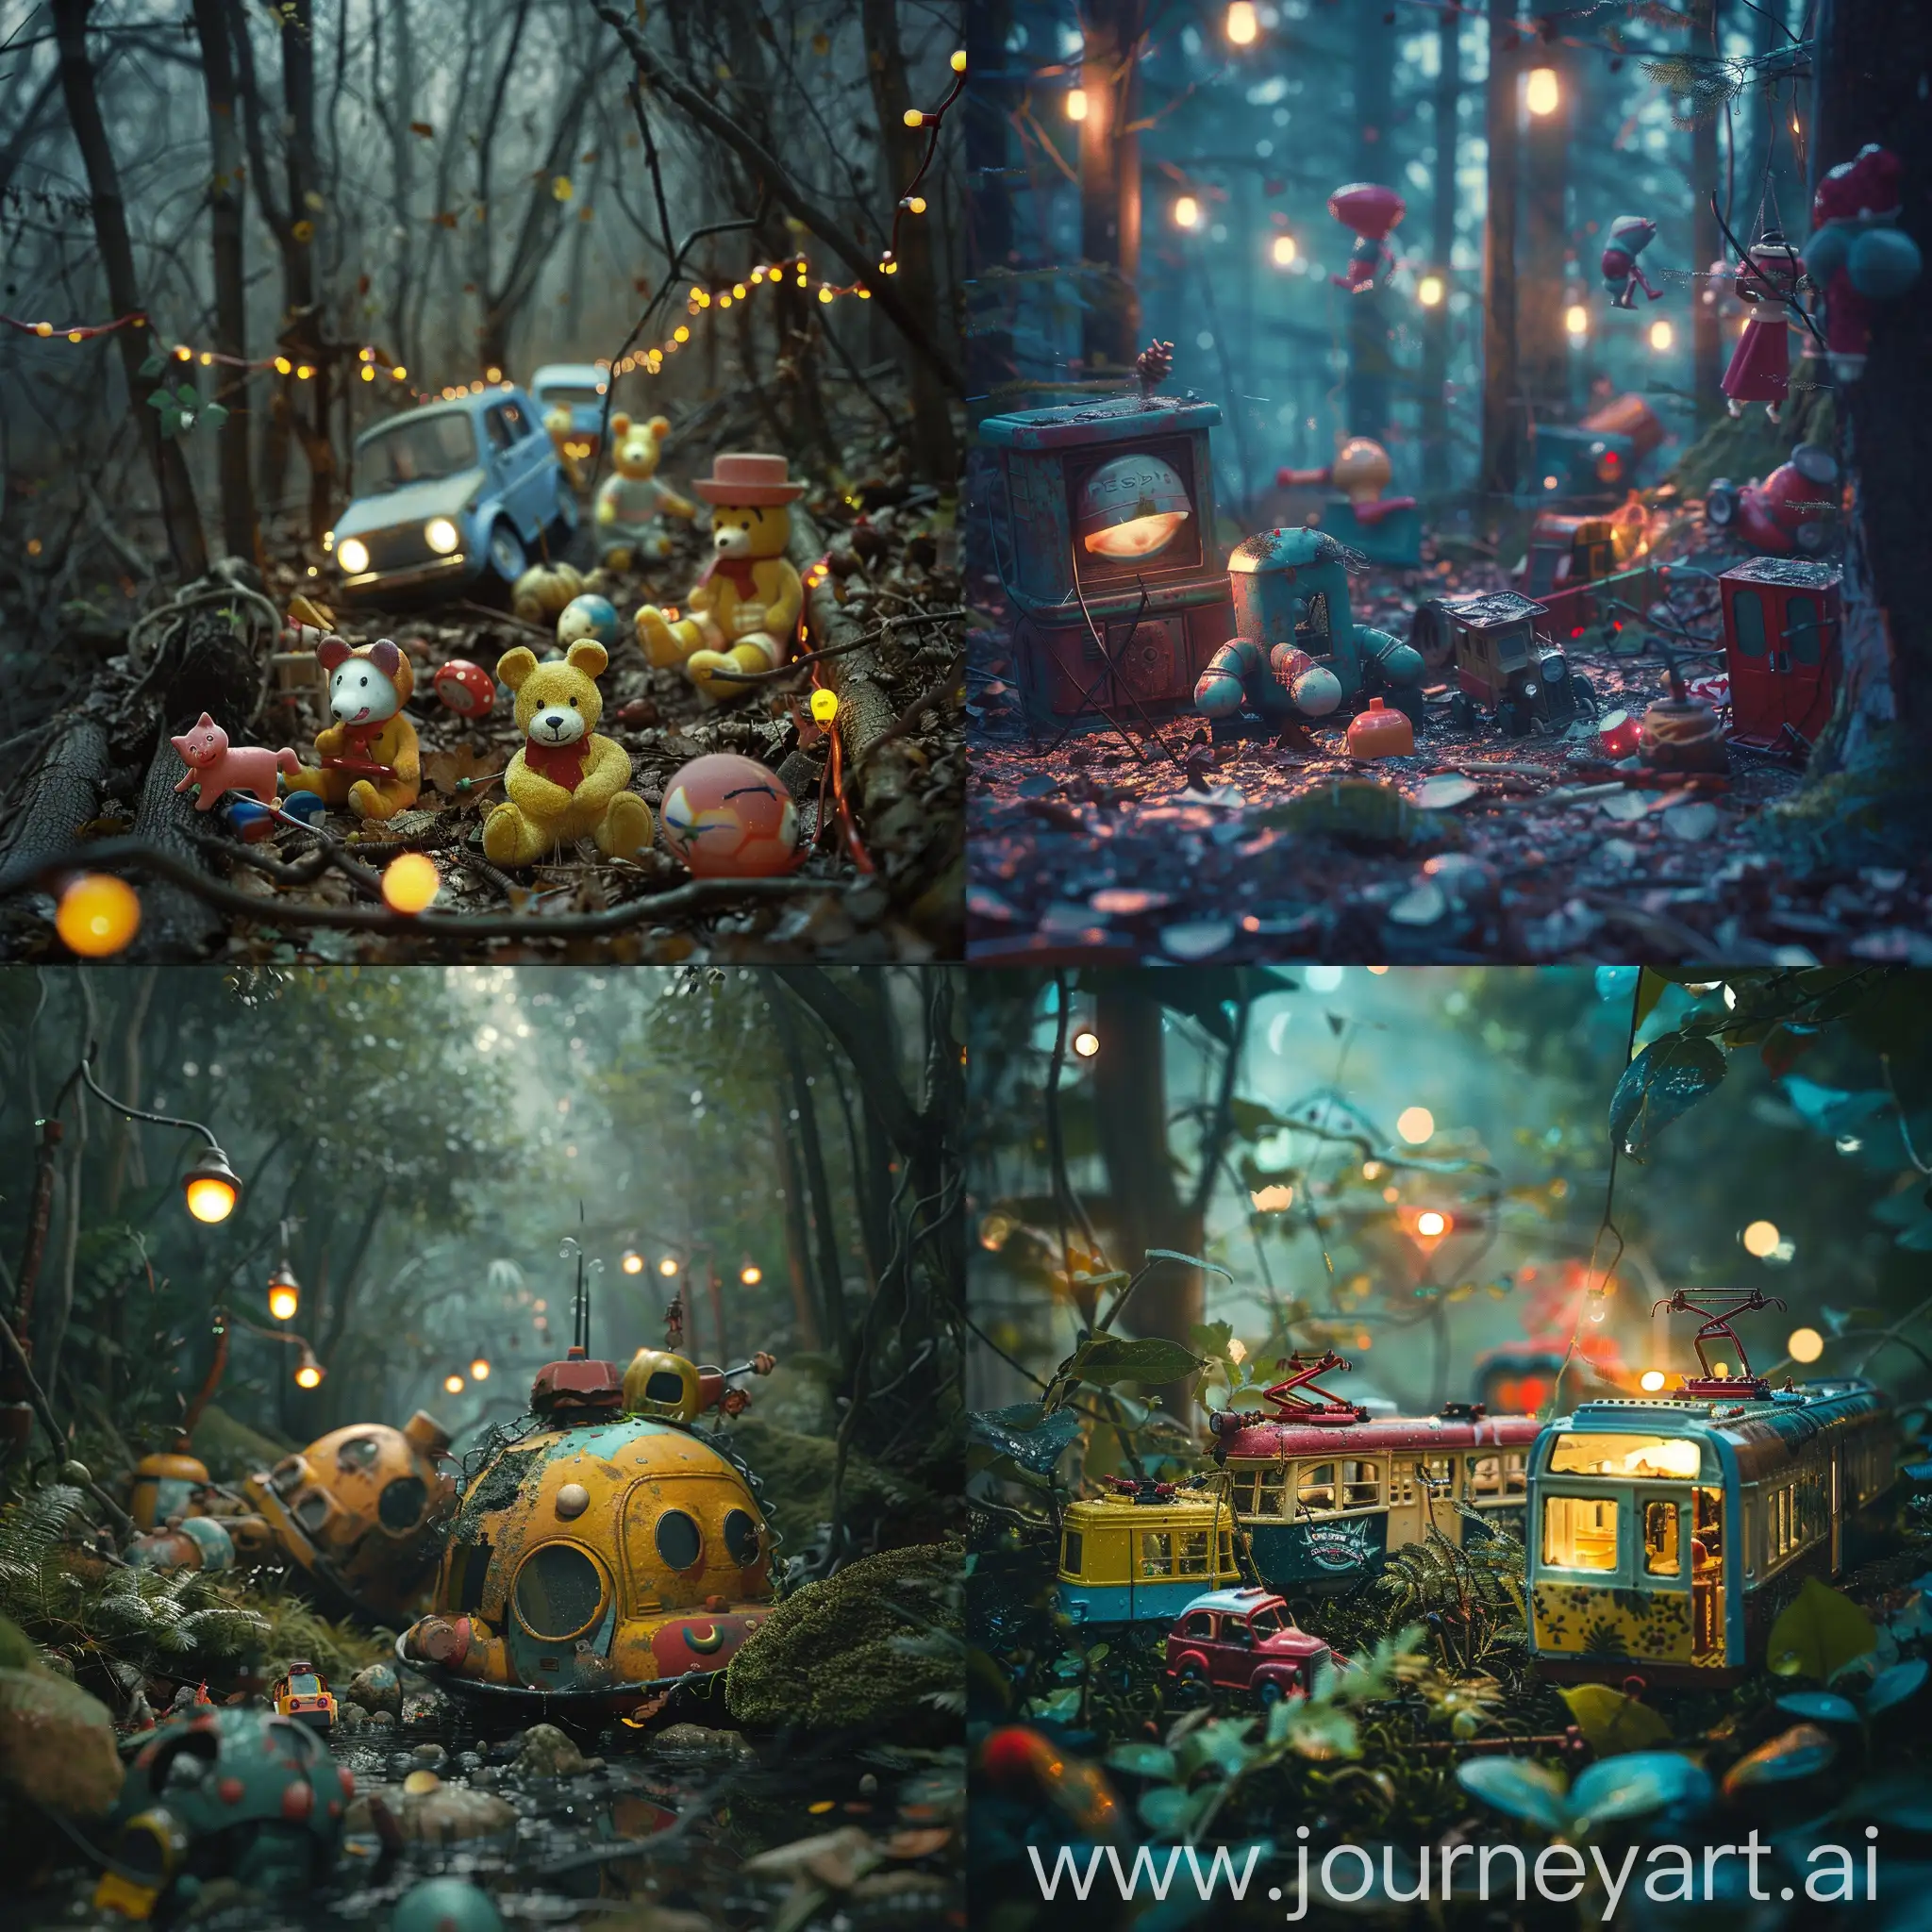 vivid toys are abandoned in a thick forest, surreal lights 